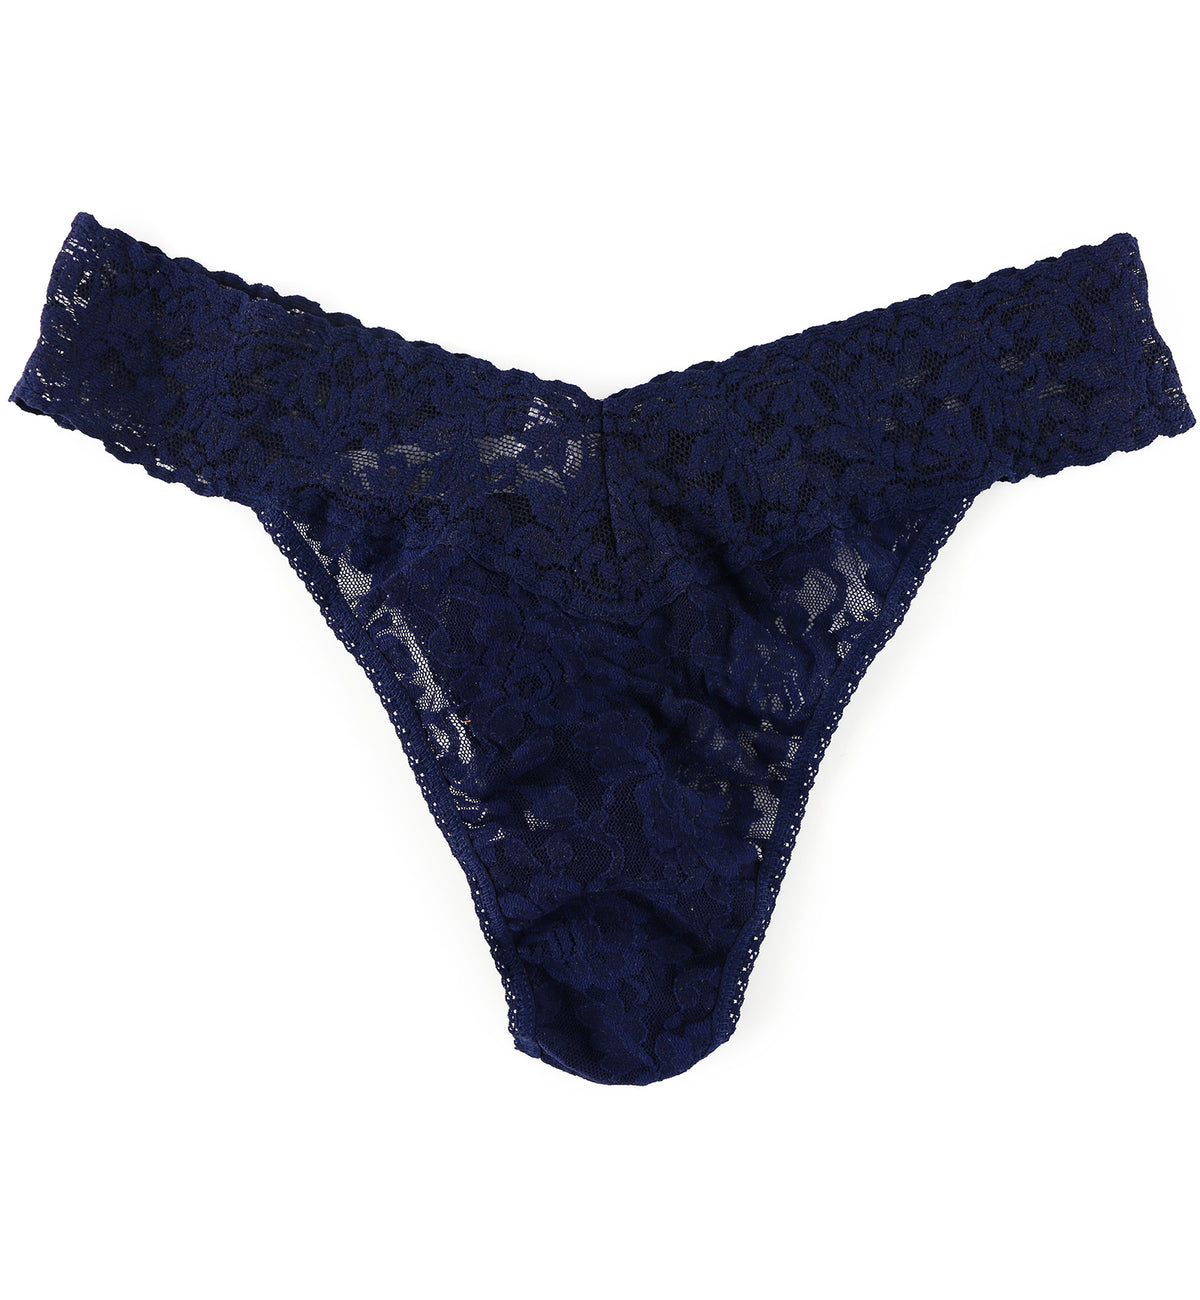 Hanky Panky Signature Lace Original Rise Thong (4811P),Navy - Navy,One Size